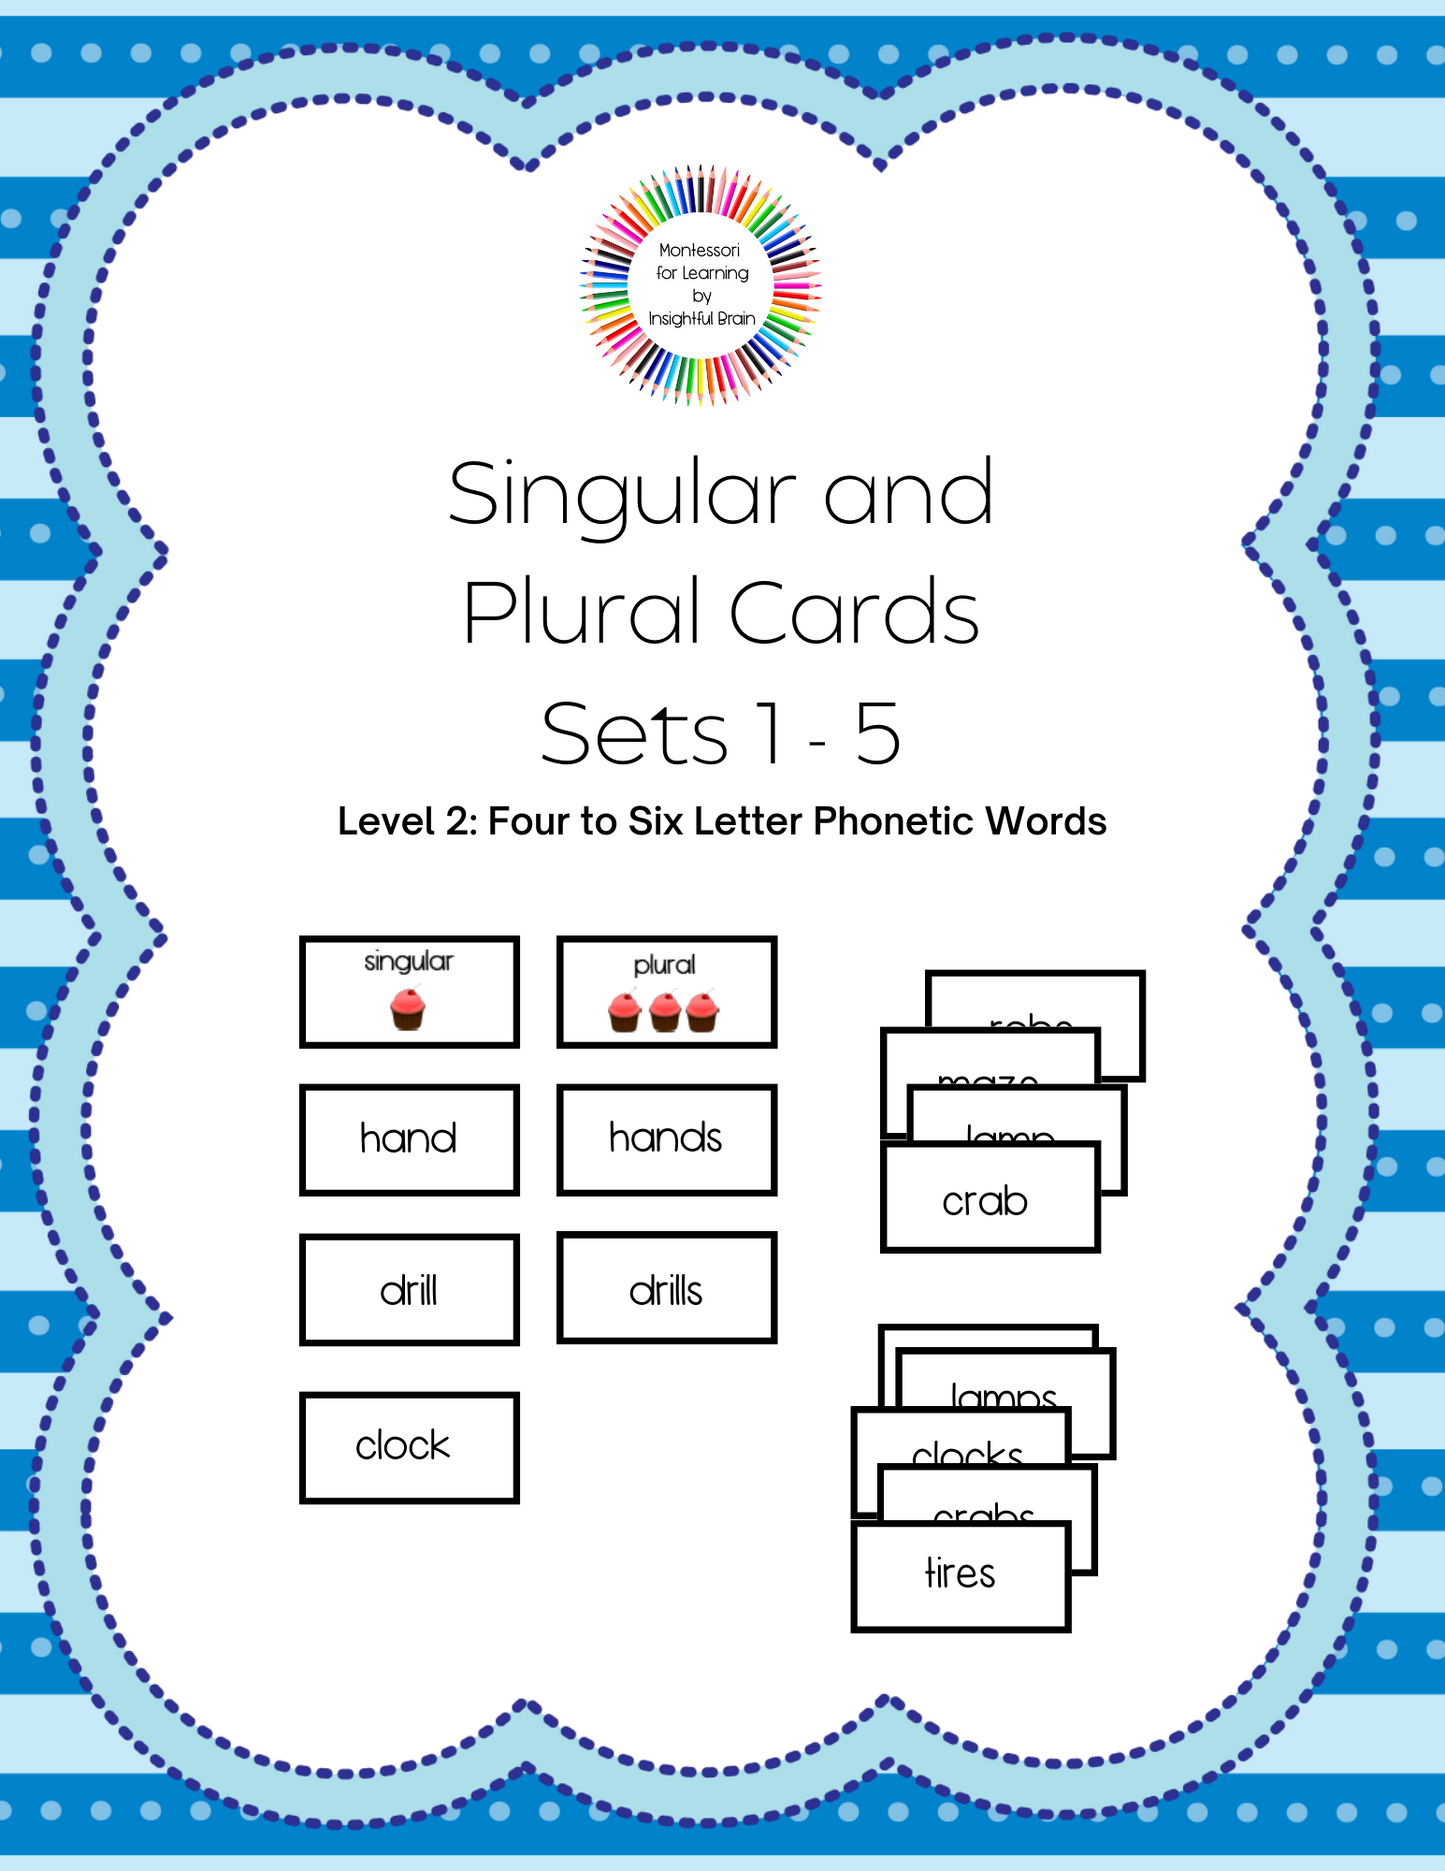 Singular and Plural Cards (Blue Level: Phonetic 4 to 6 Letter Words)